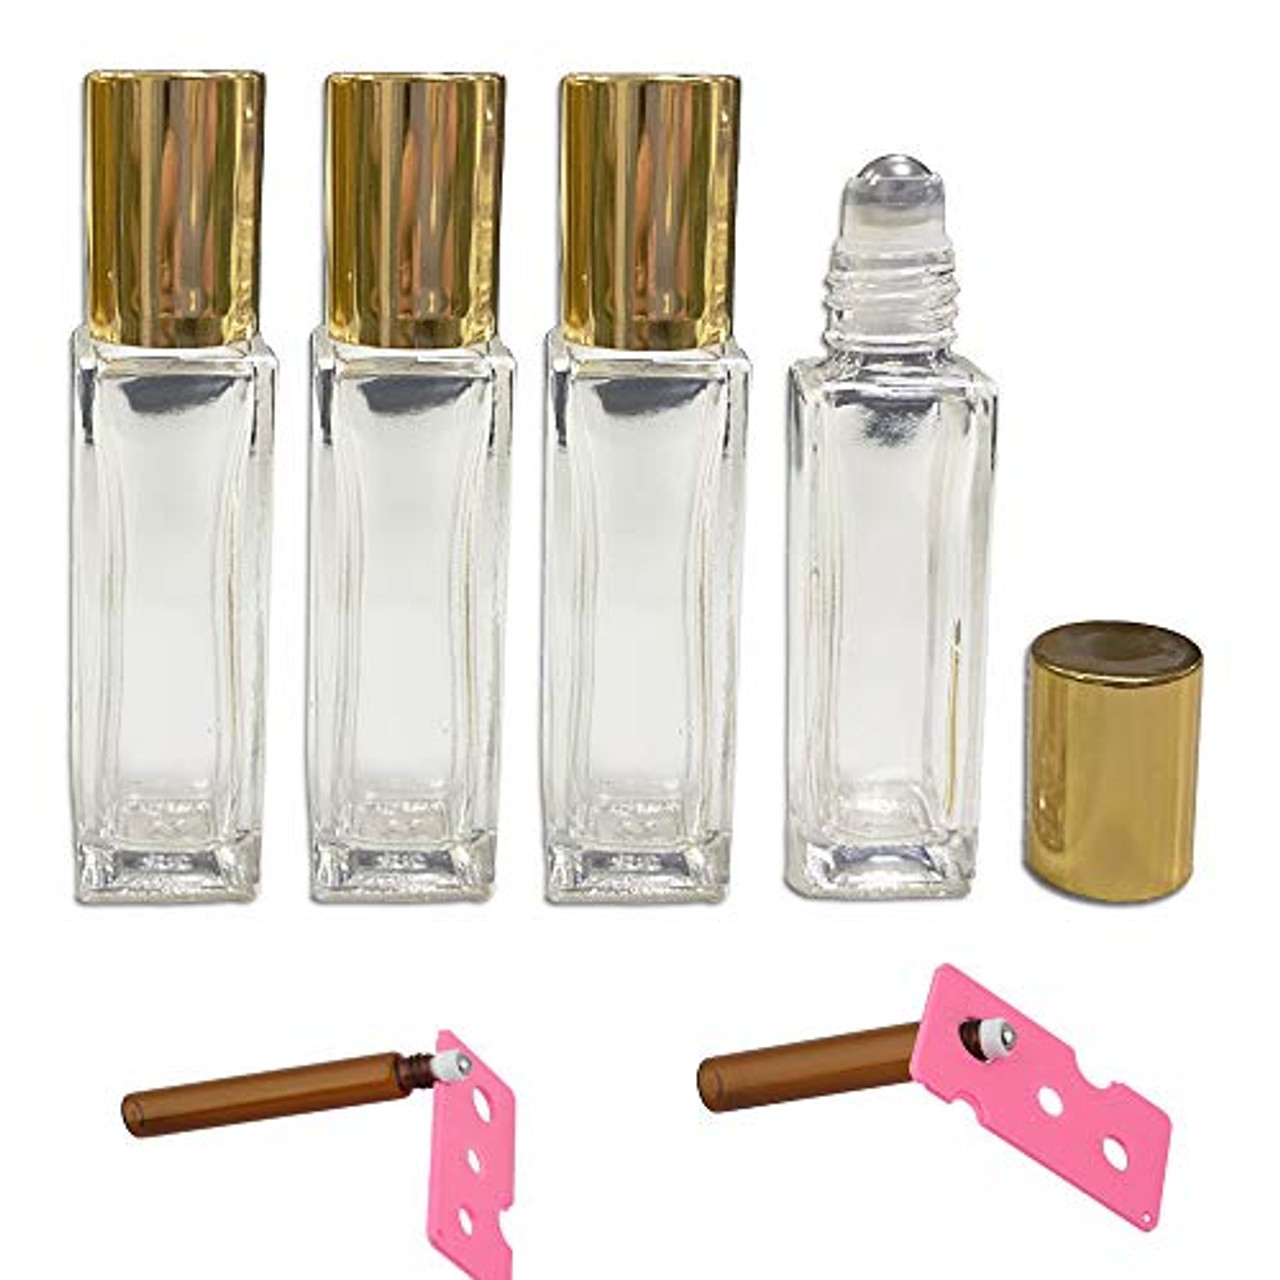 Chanel: No. 5 - Type Scented Body Oil Fragrance [Clear Glass - Roll-On] Brown / 1/8 oz.